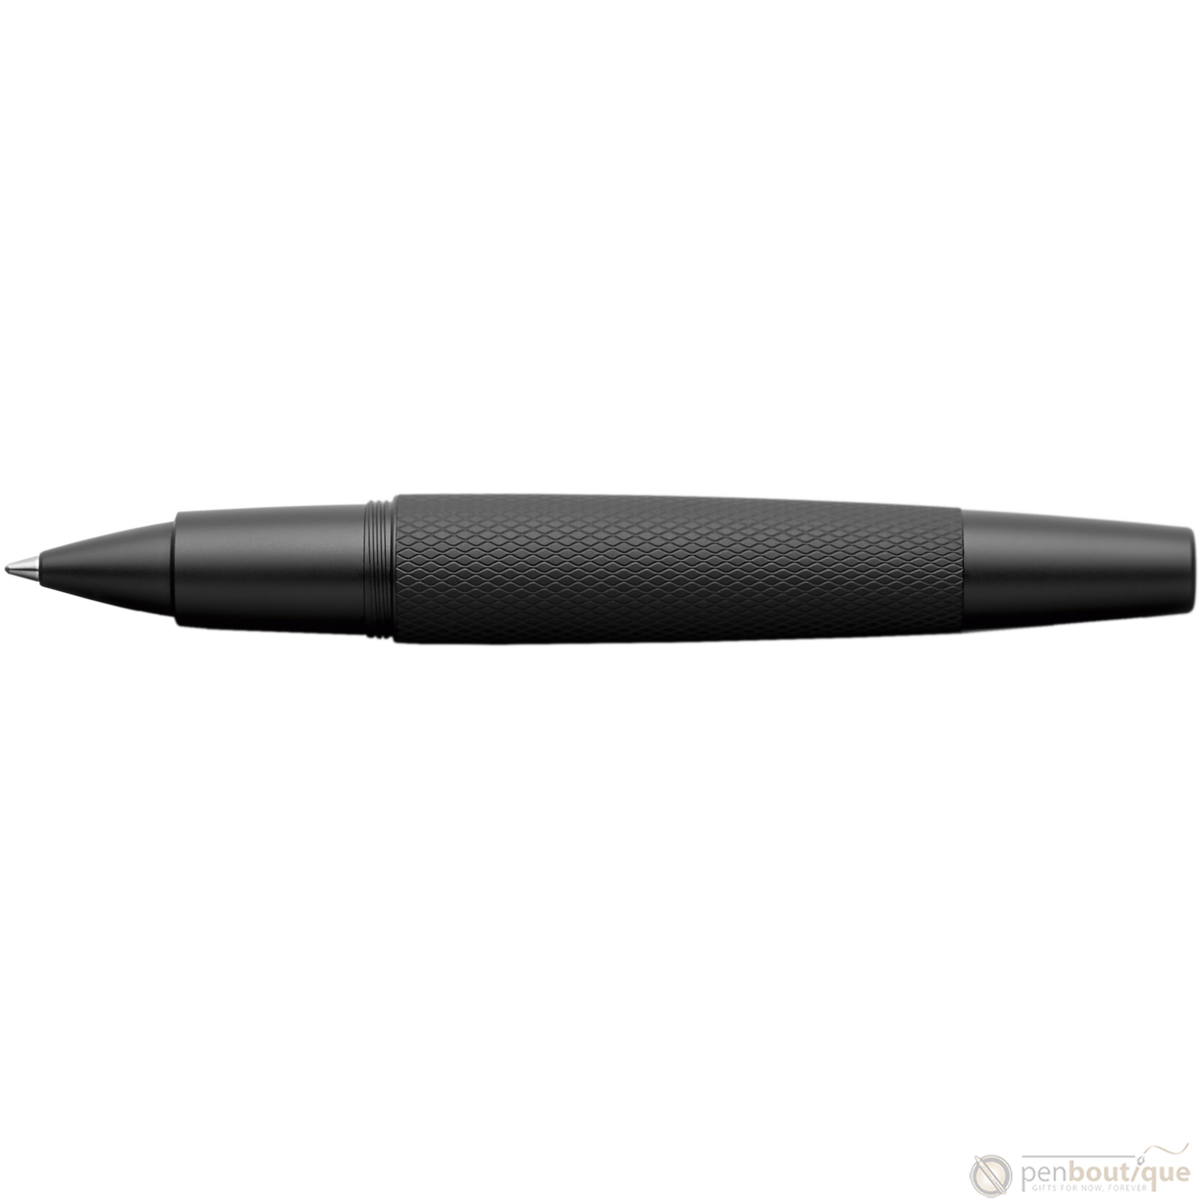 Faber-Castell E-motion rollerball: the King of Pens - Scrively